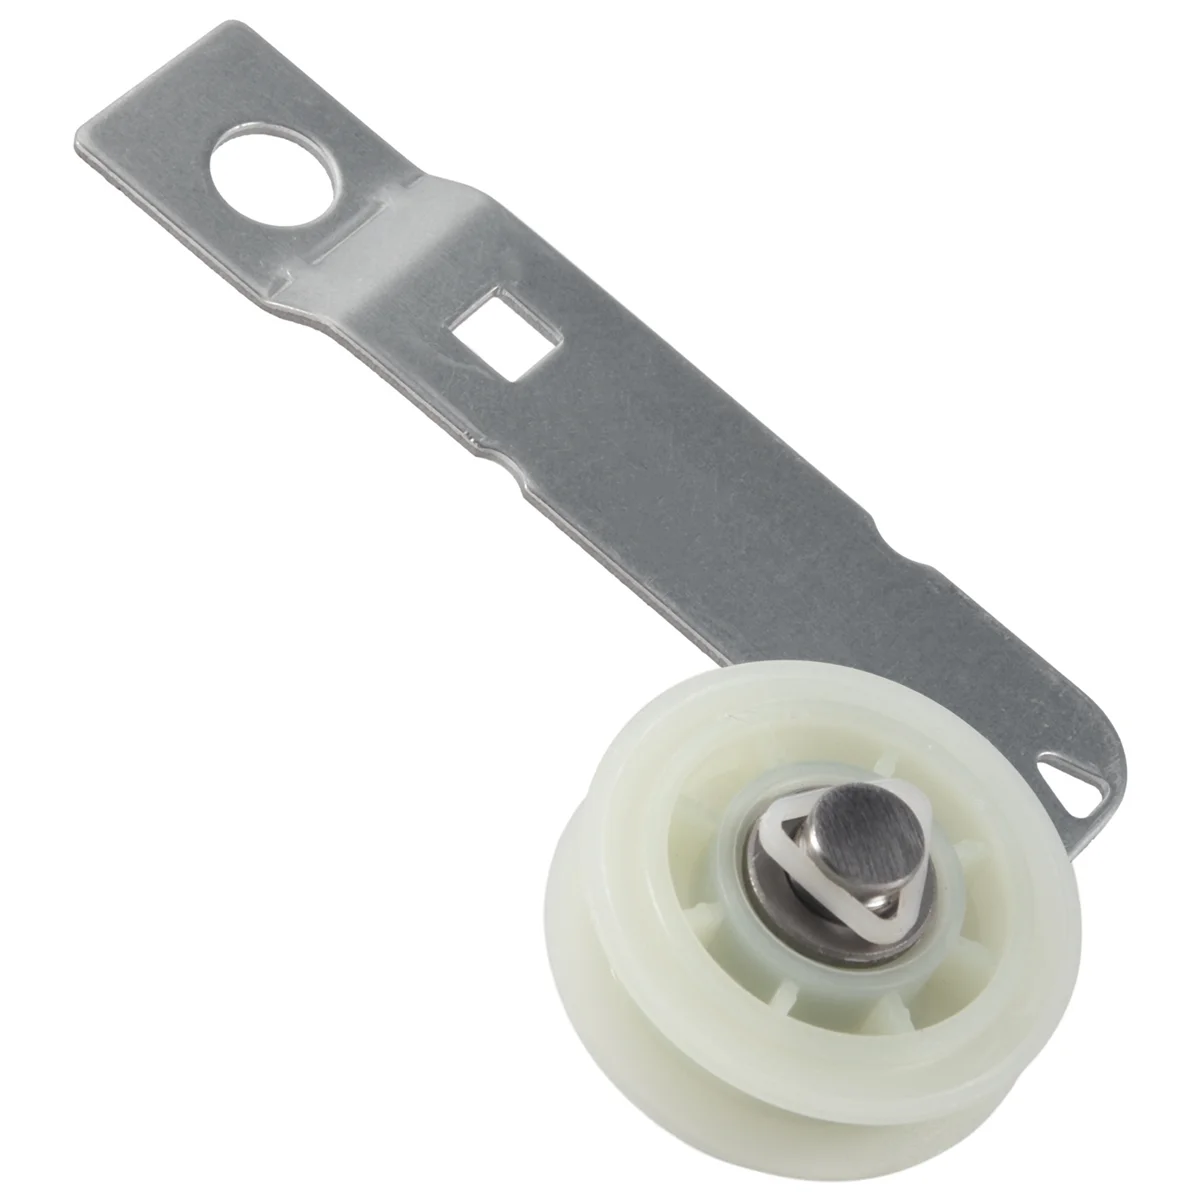 

for W10837240 Dryer Idler Pulley with Bracket,Replace Part for Kenmore Dryer